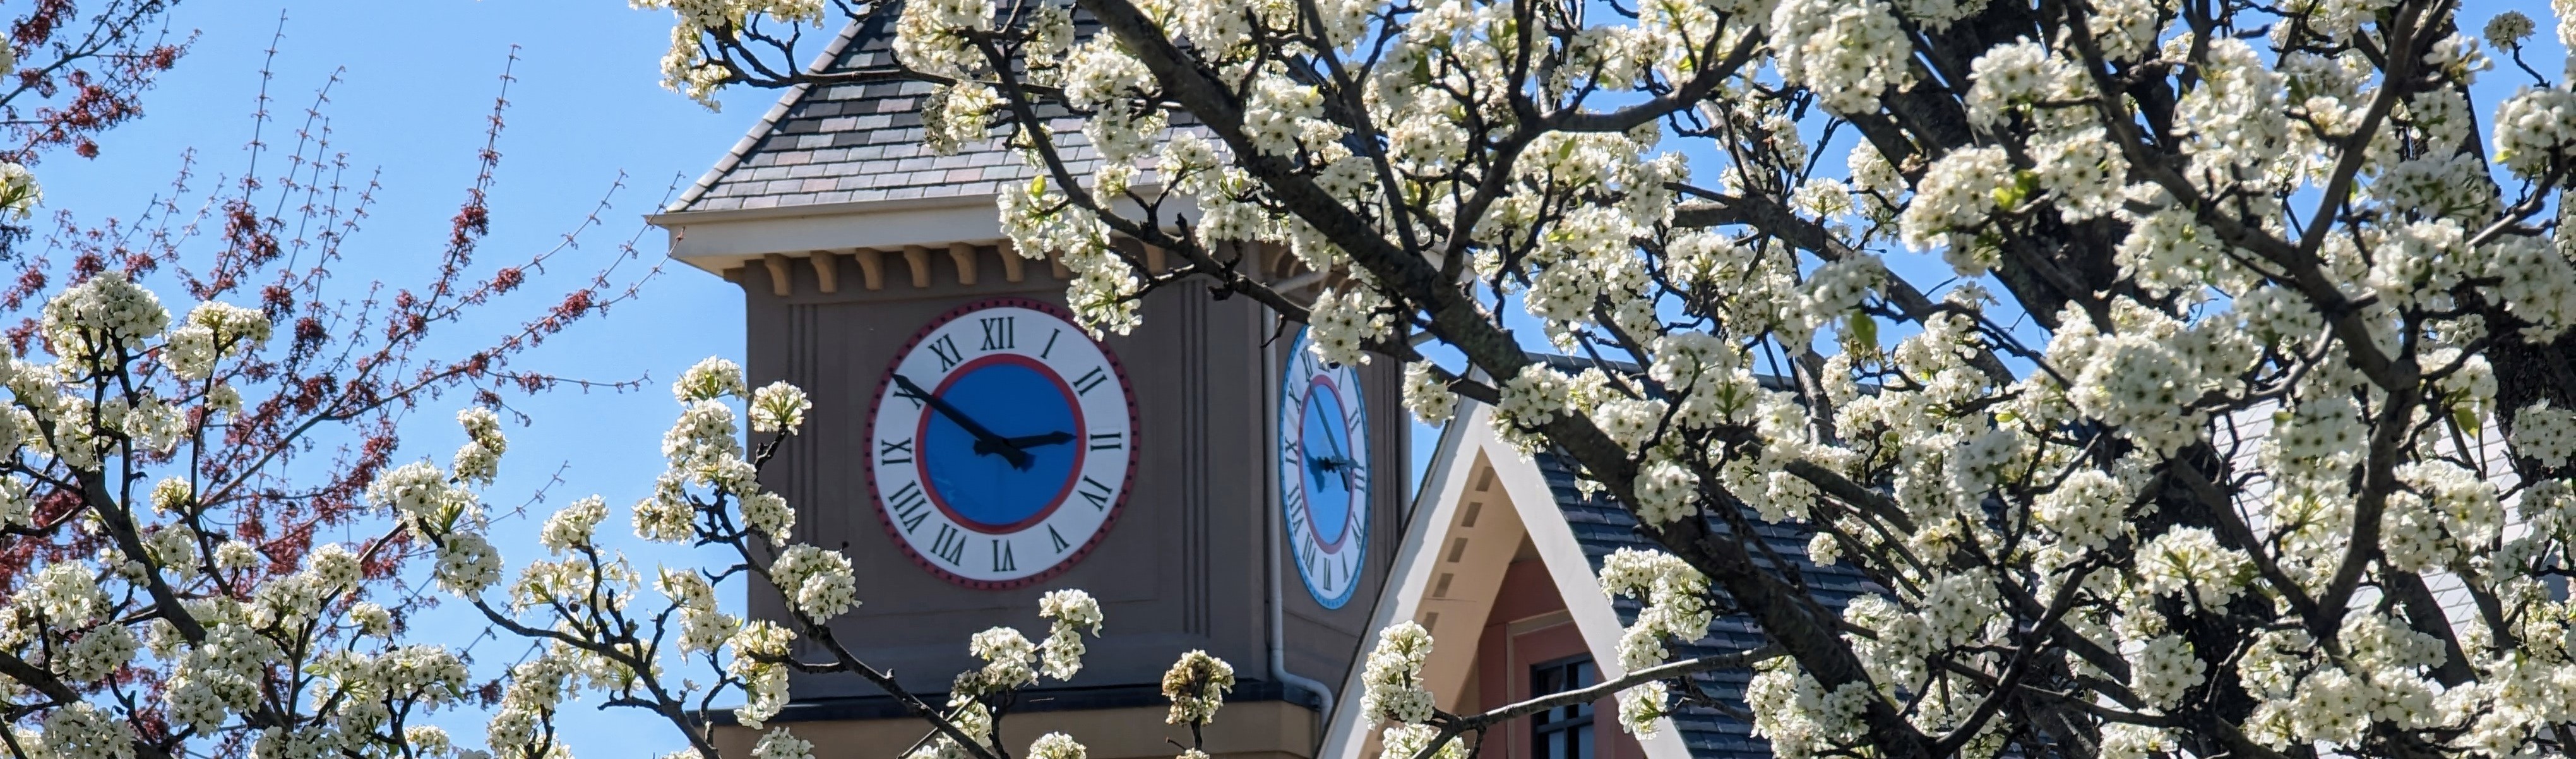 Clock-Tower-in-Flowers_Cropped